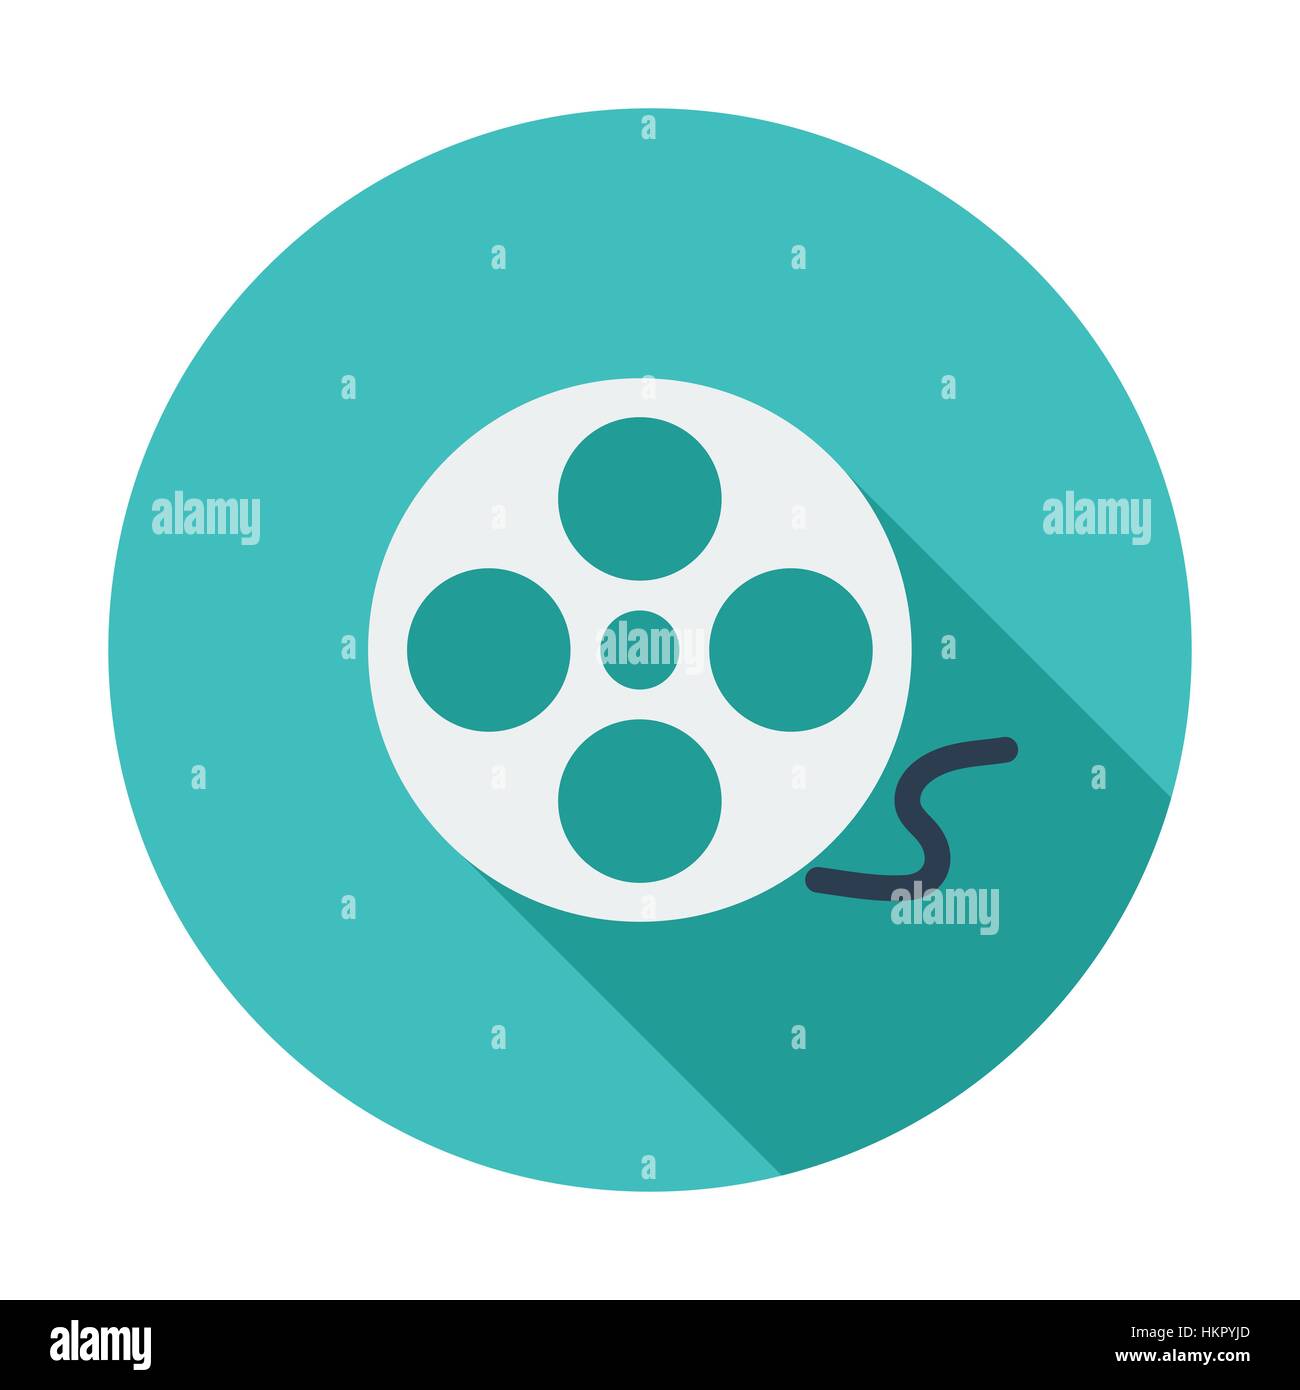 Icon reel of film. Single flat color icon. Vector illustration. Stock Vector